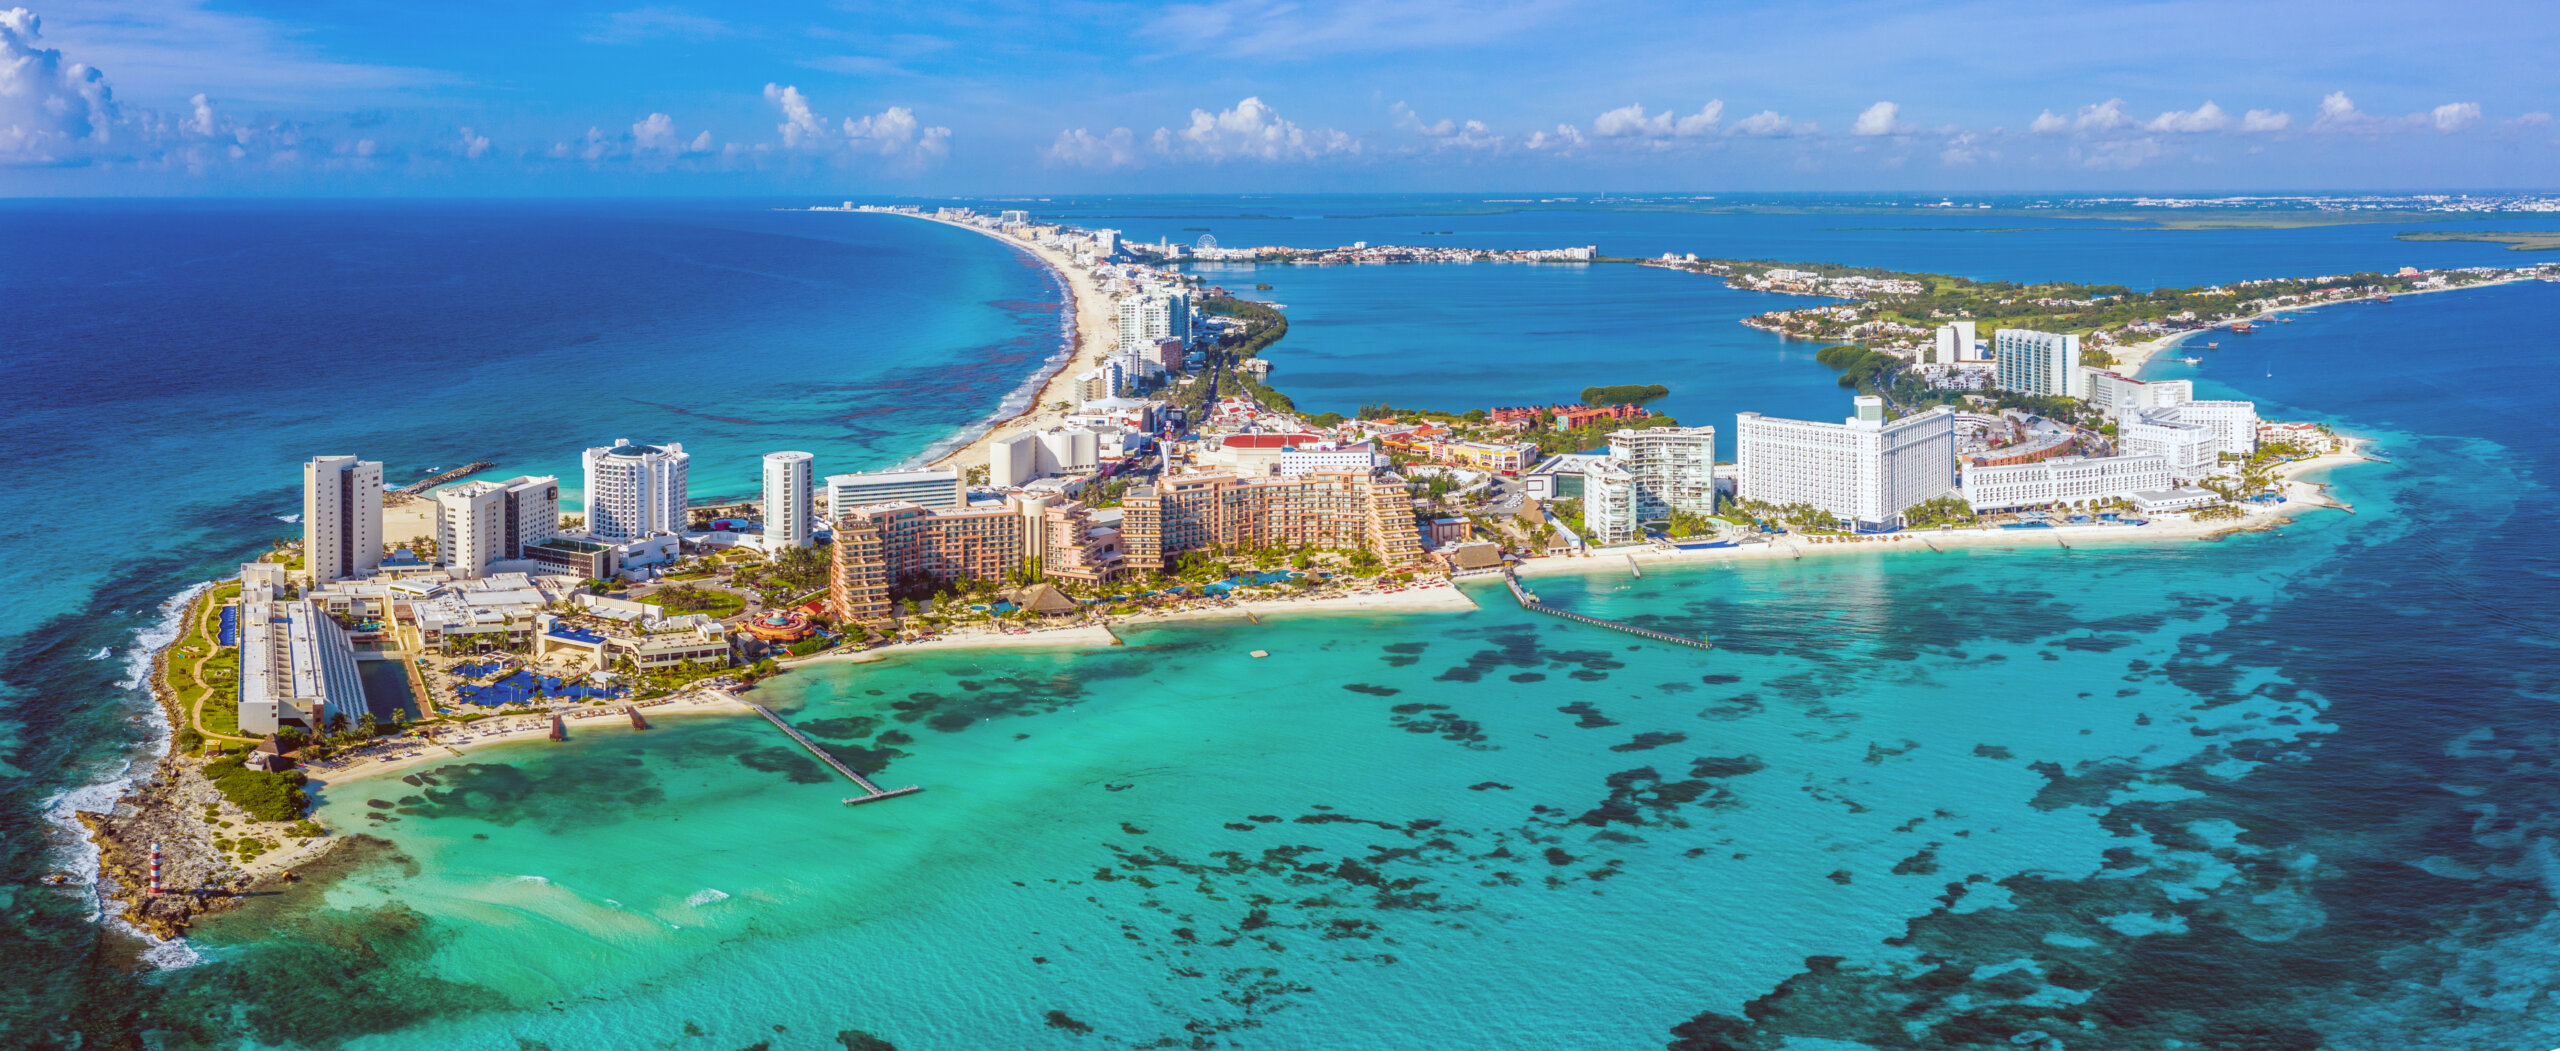 Aerial panoramic view of the northern peninsula of the Hotel Zone (Zona Hotelera) in Cancún, Mexico